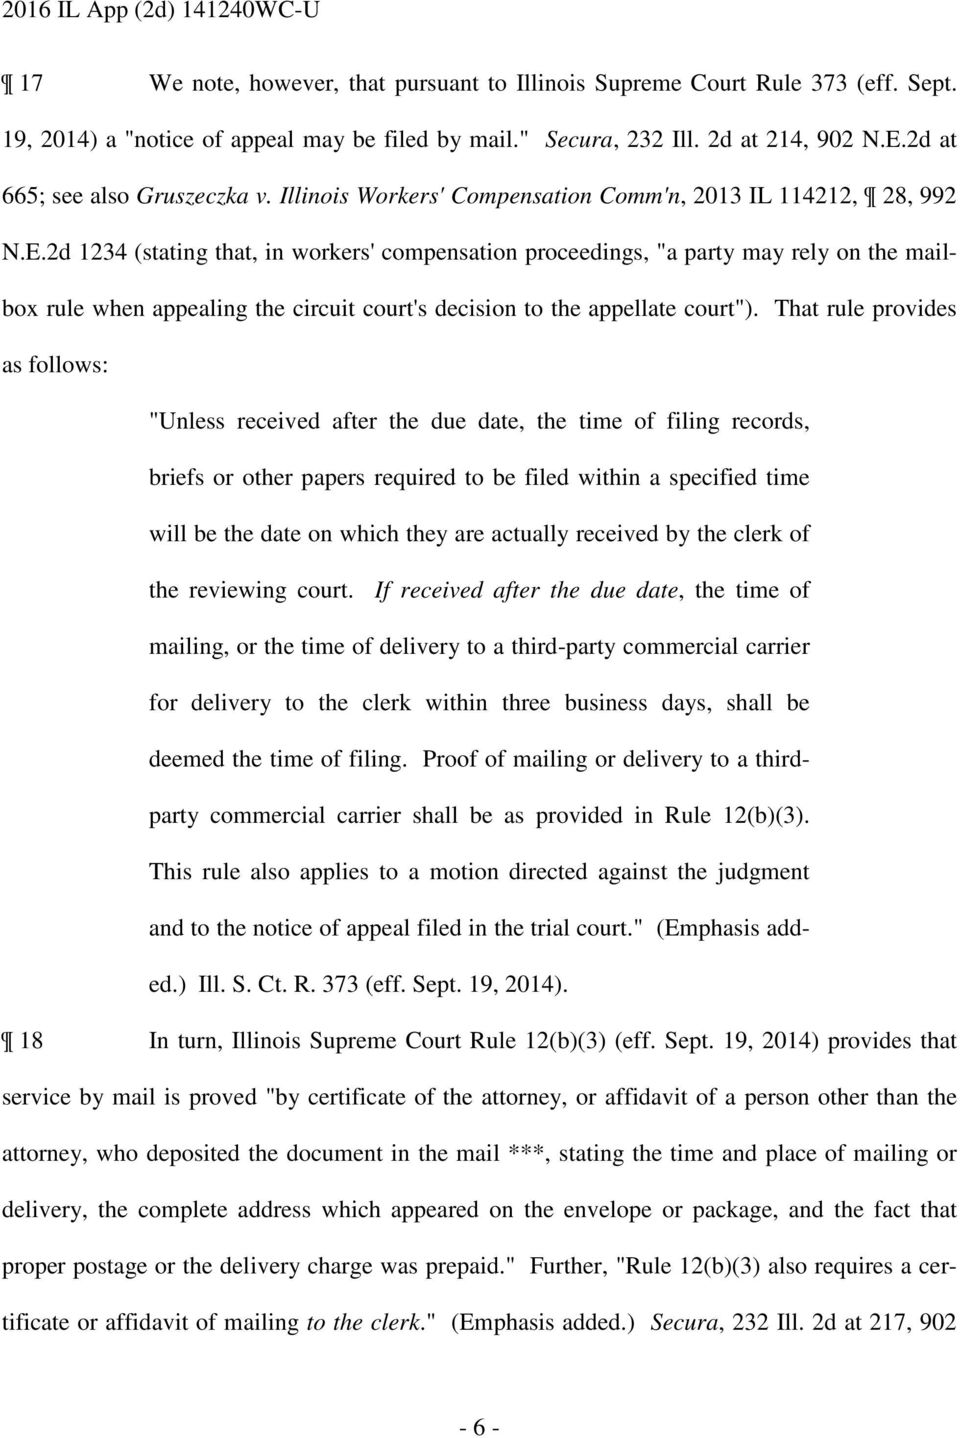 2d 1234 (stating that, in workers' compensation proceedings, "a party may rely on the mailbox rule when appealing the circuit court's decision to the appellate court".